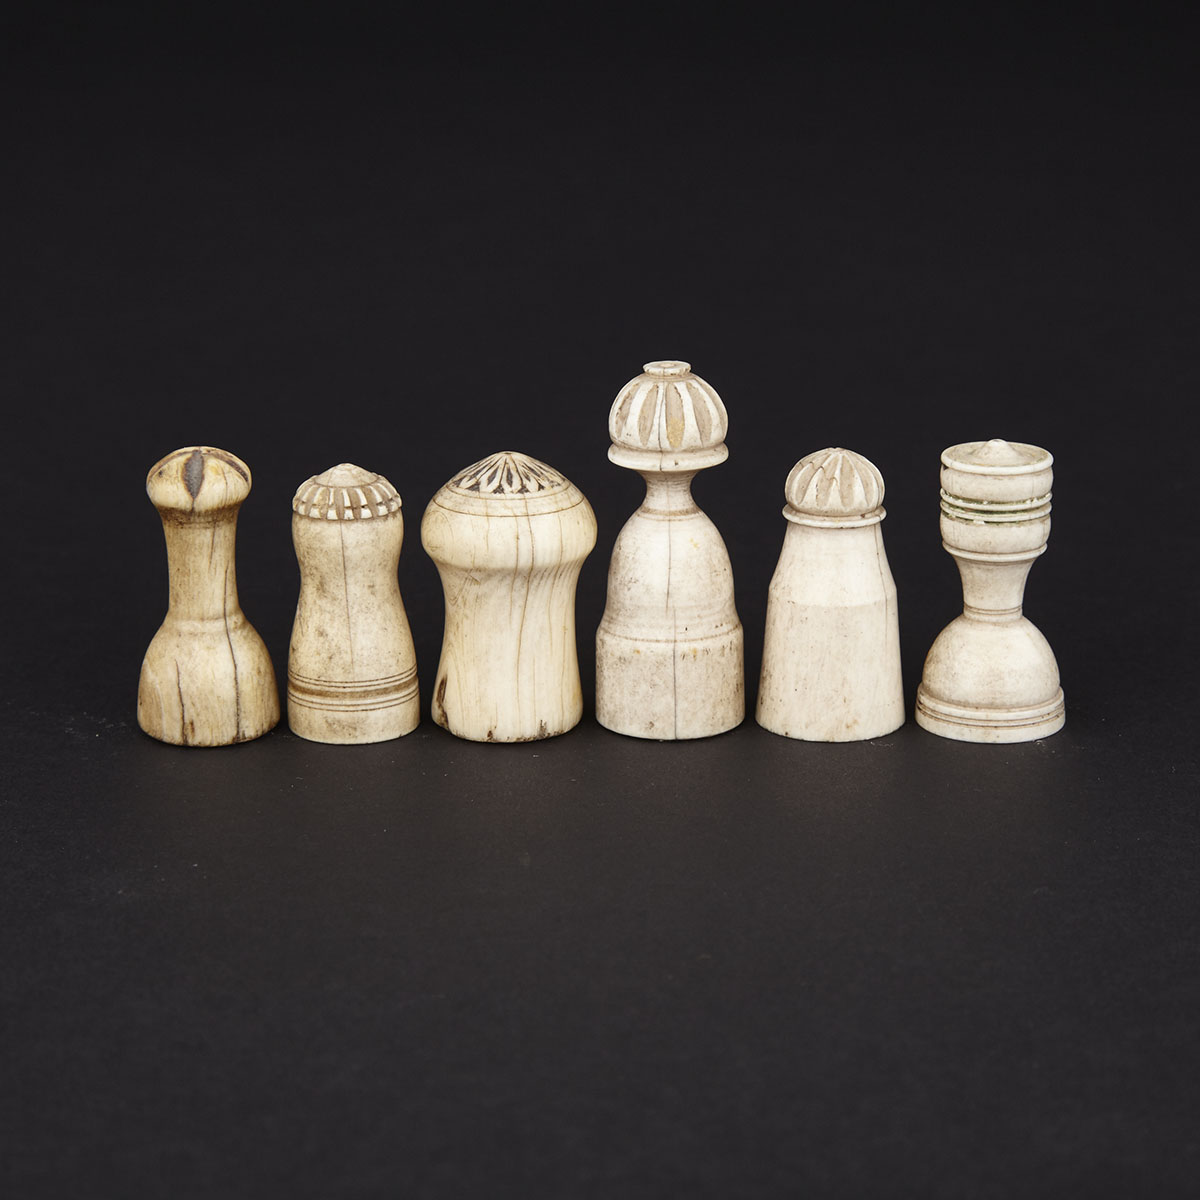 Group of Six Arab Islamic Ivory and Bone Chess Pieces, 18th century and earlier